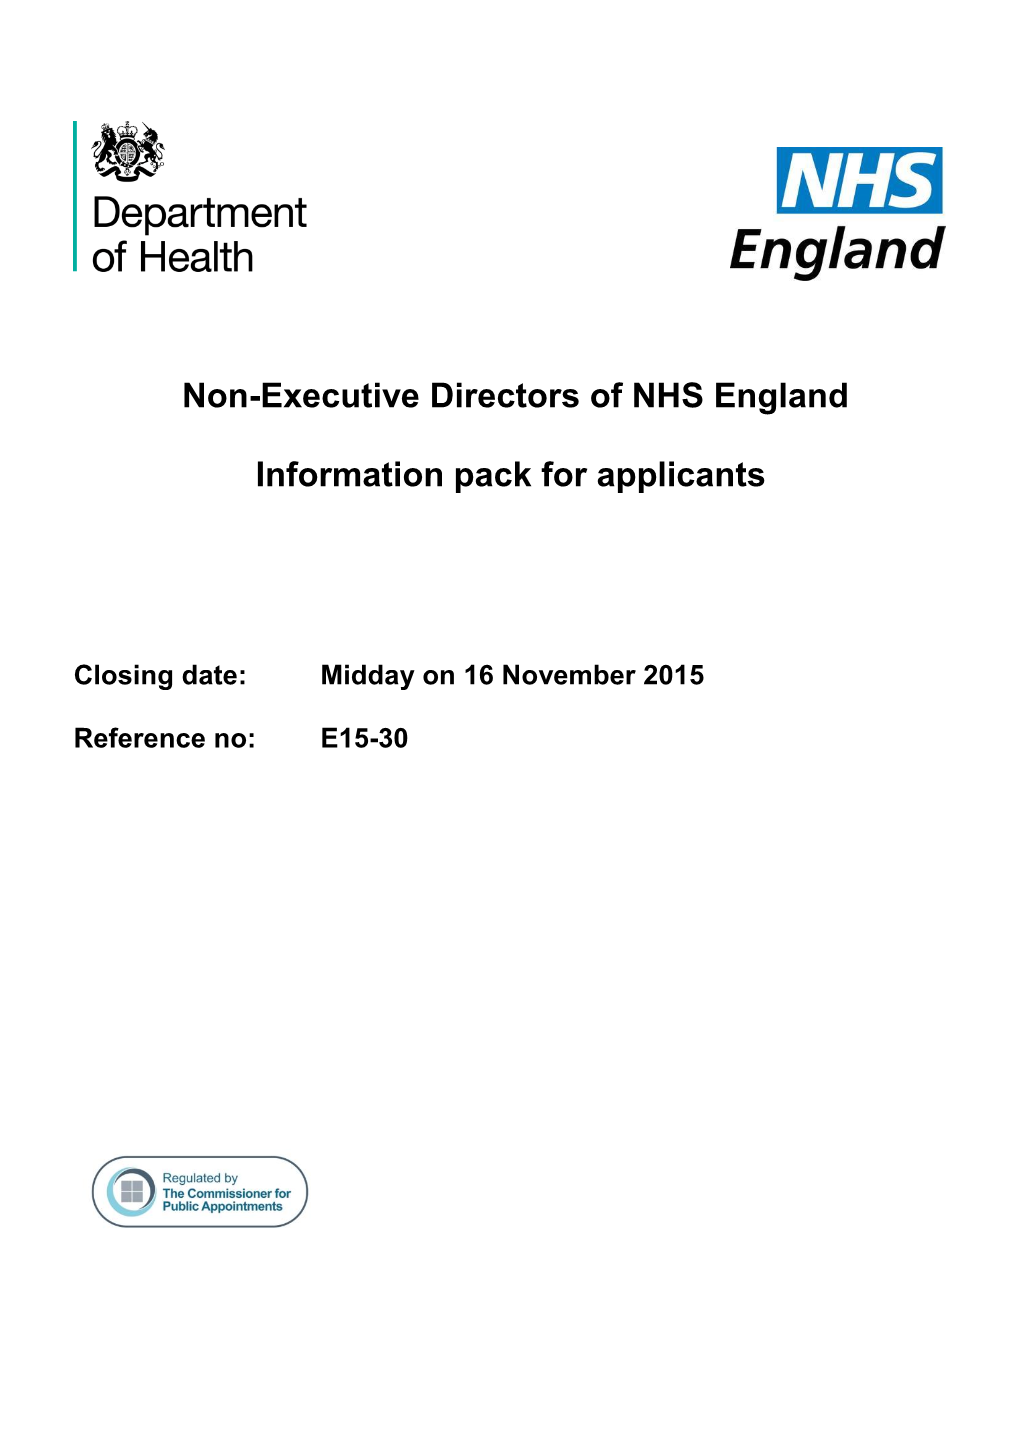 Non-Executive Directors of NHS England Information Pack For